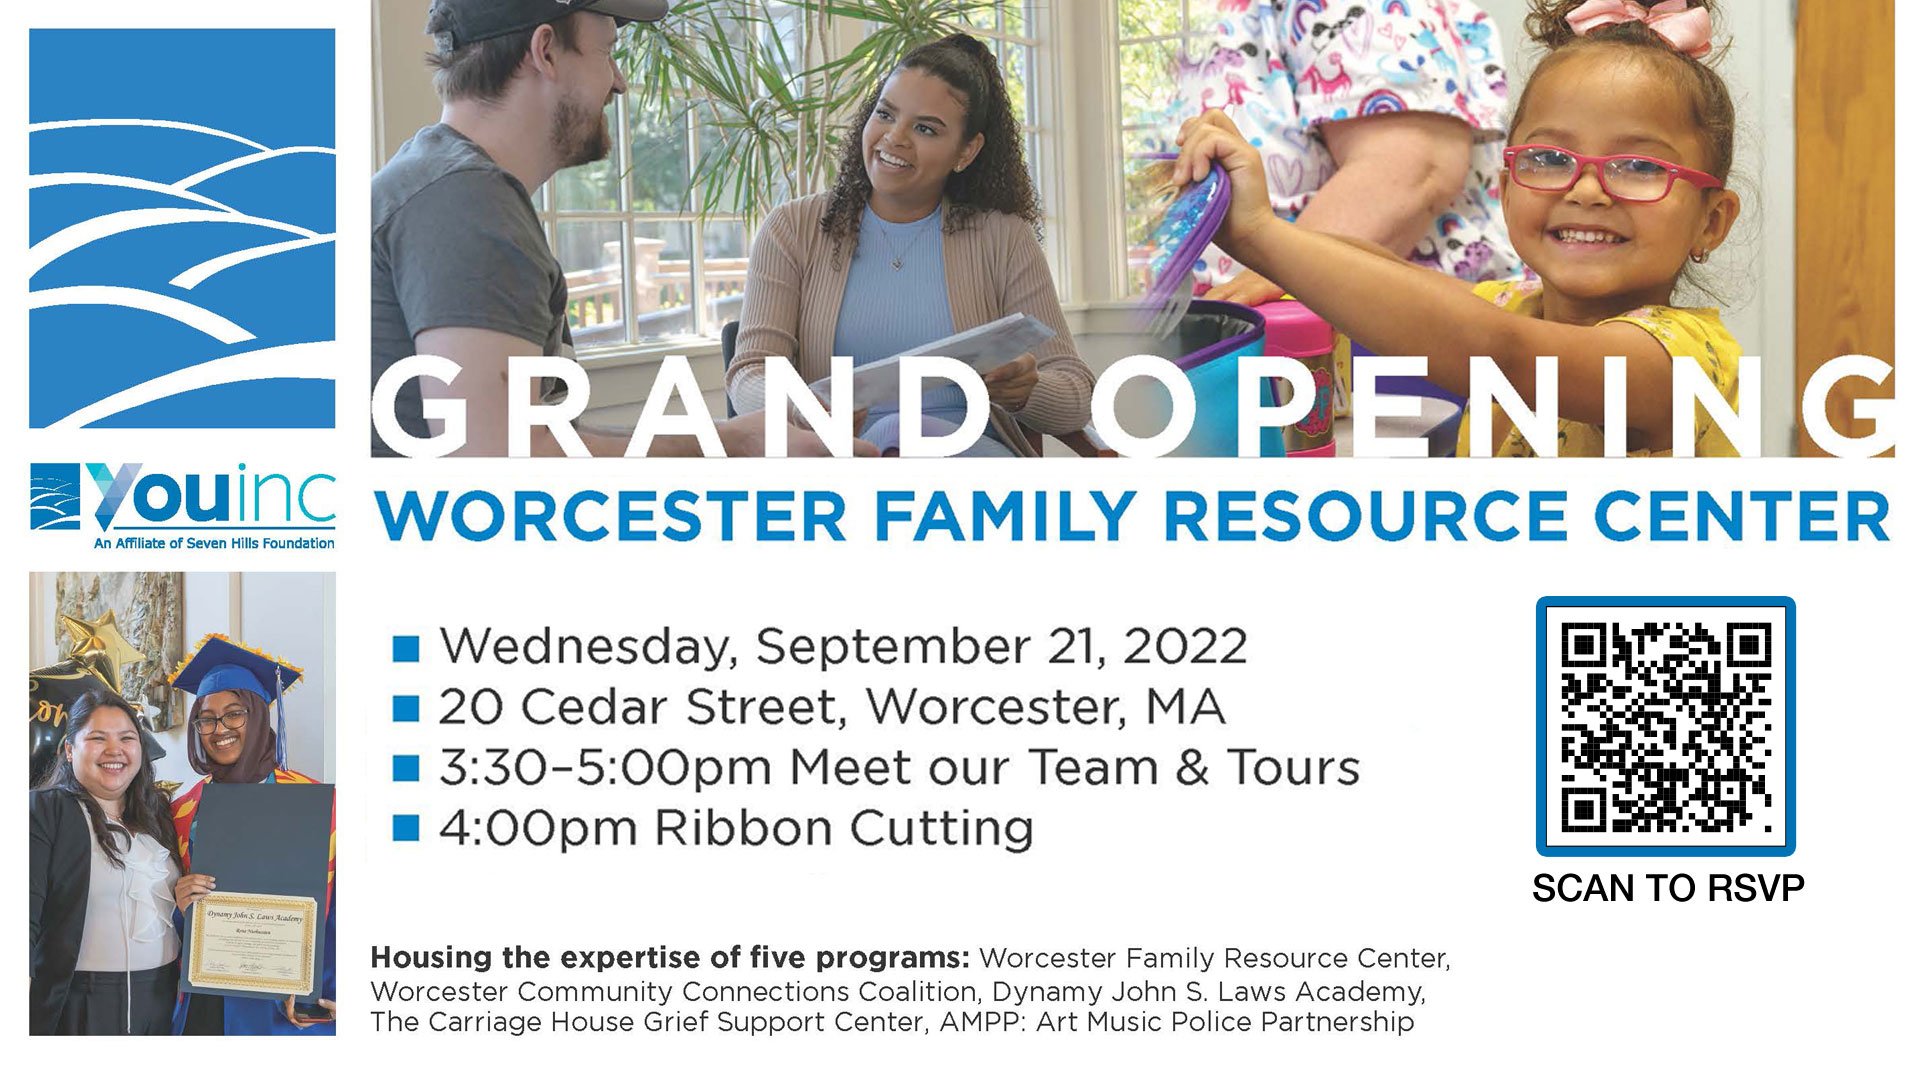 Grand Opening: Worcester Family Resource Center